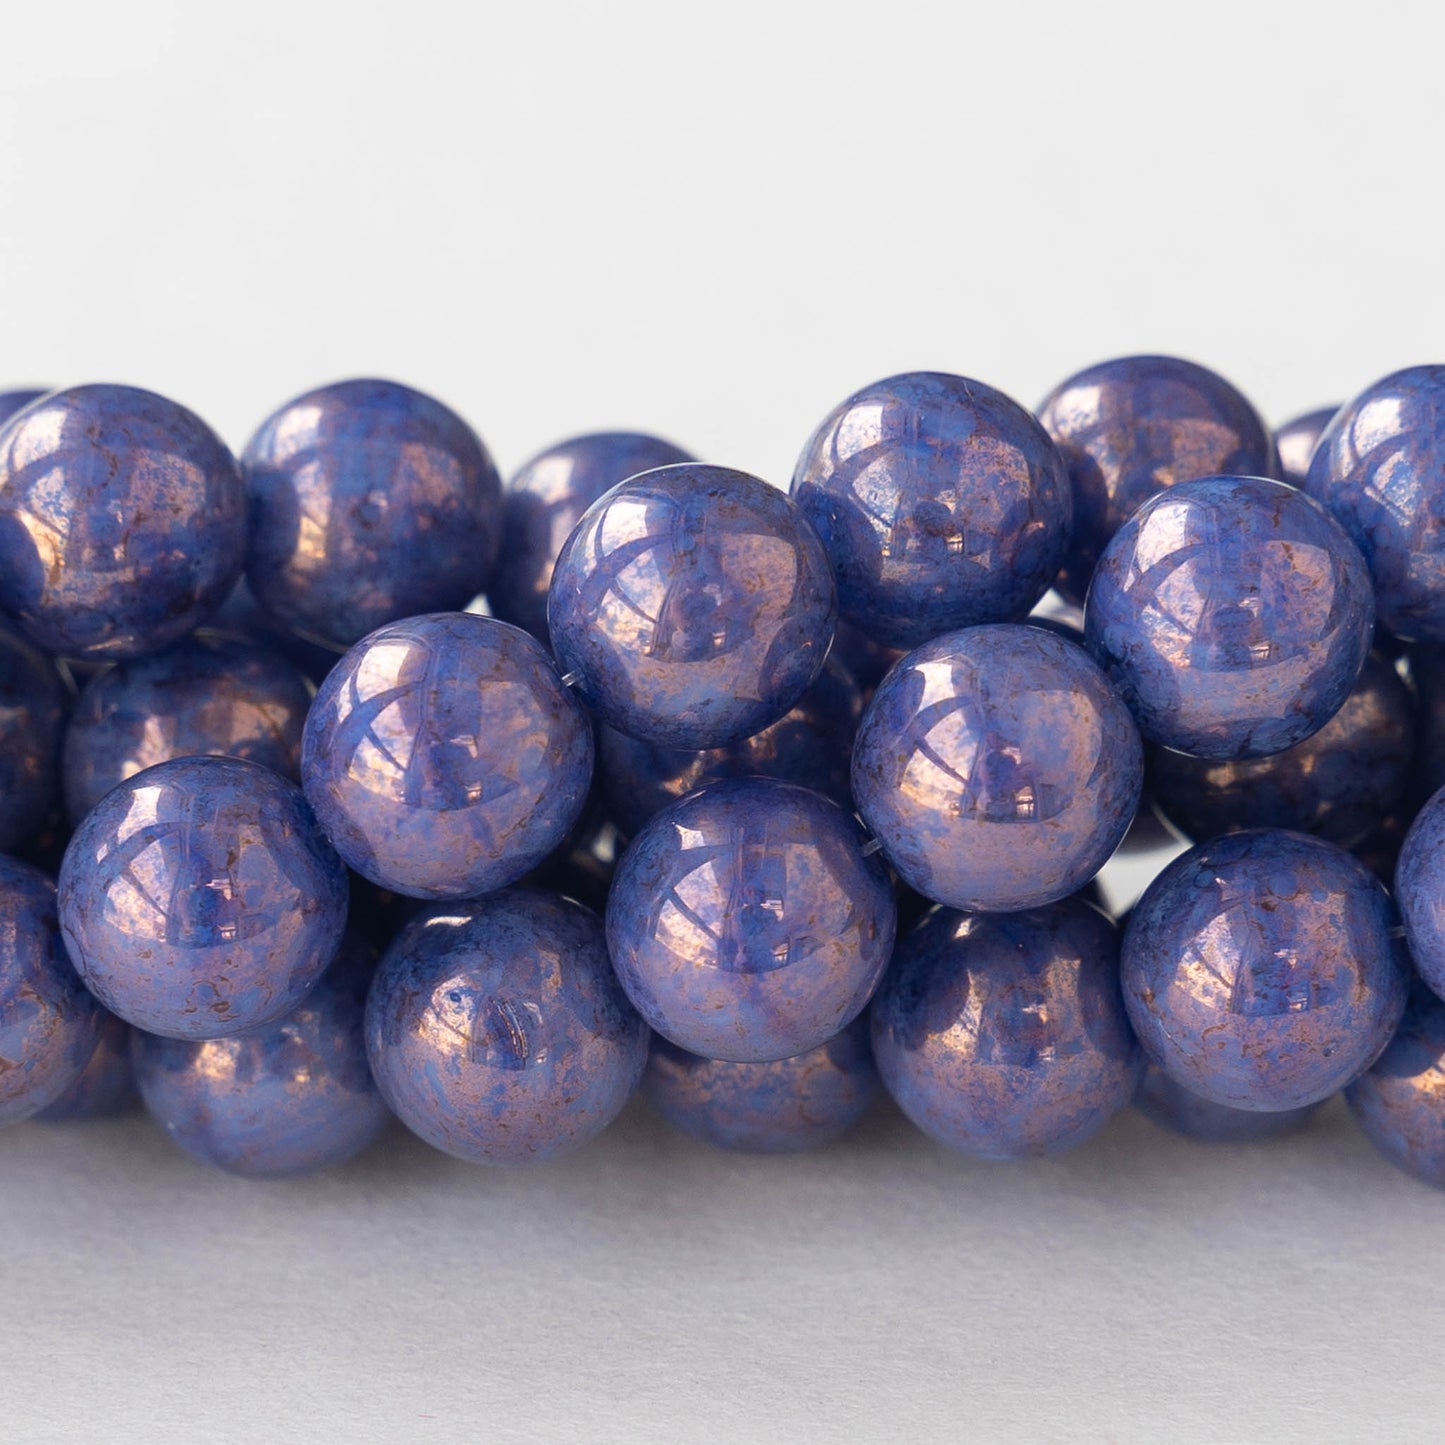 8mm Round Glass Beads - Opaque Purple Luster  - 25 beads